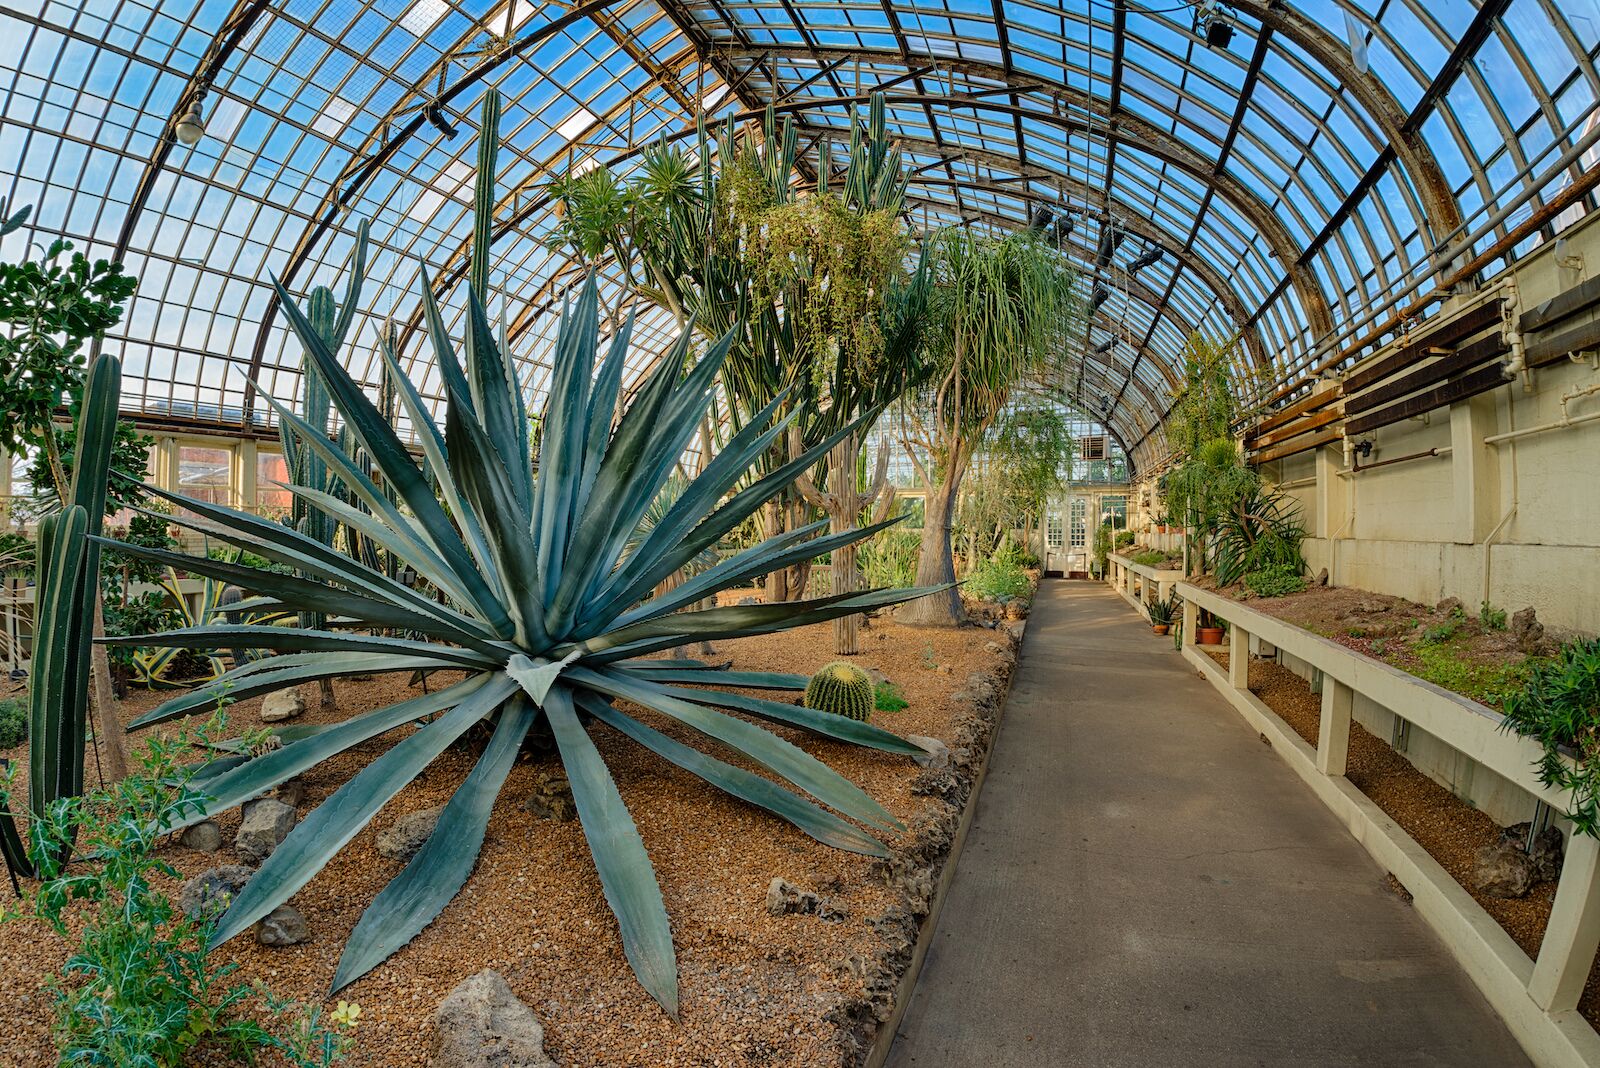 The Garfield Park Conservatory is one of the best things to do in Chicago